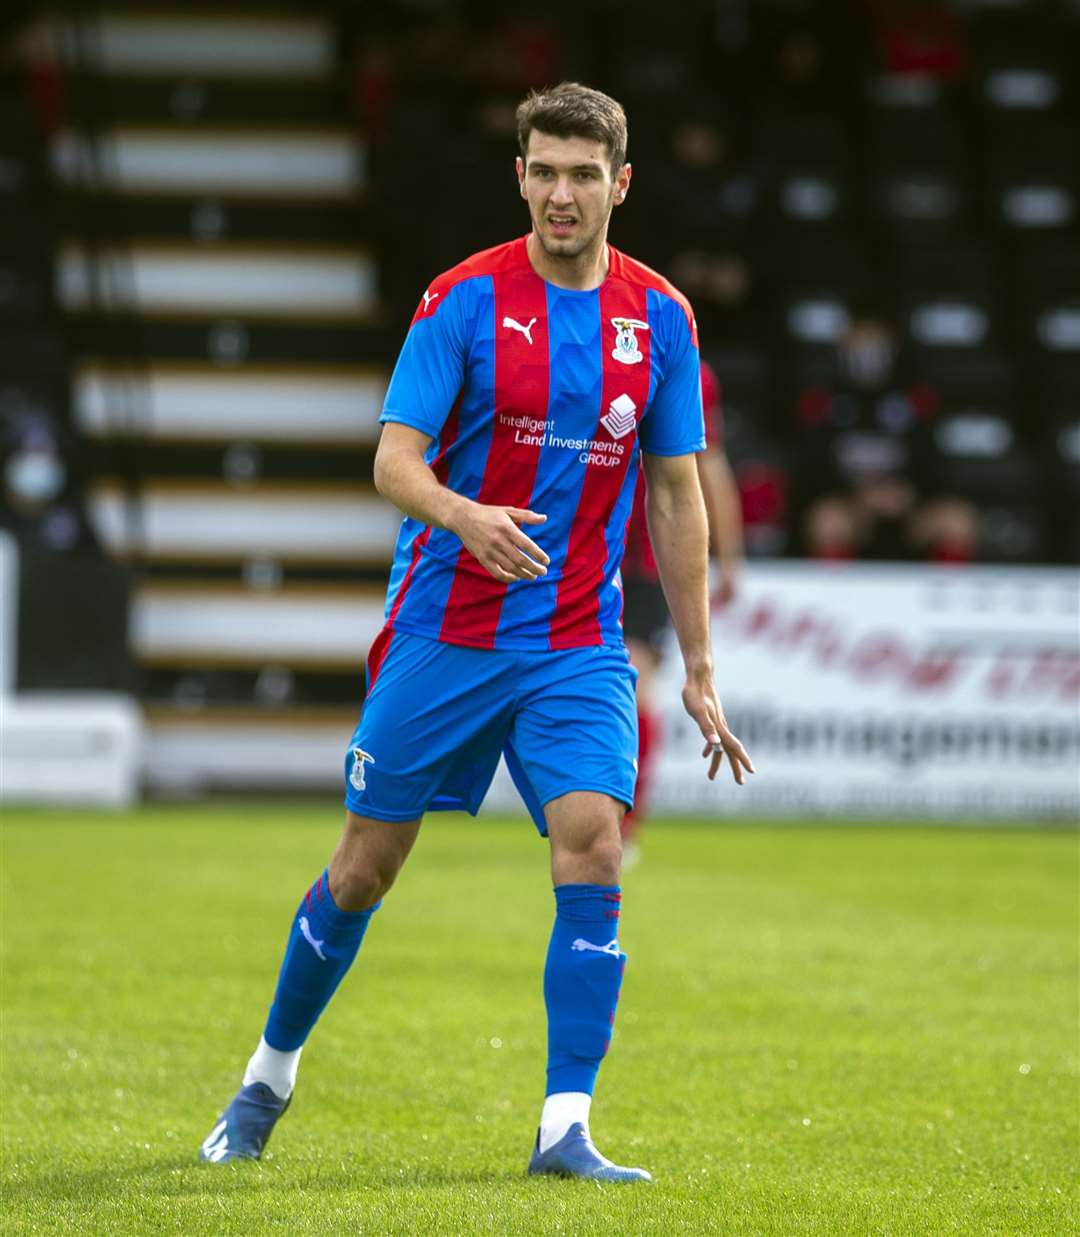 Picture - Ken Macpherson, Inverness. Pre-Season Friendly. Elgin City(3) v Inverness CT(7). 26.09.20. ICT's Nickolay Todorov.